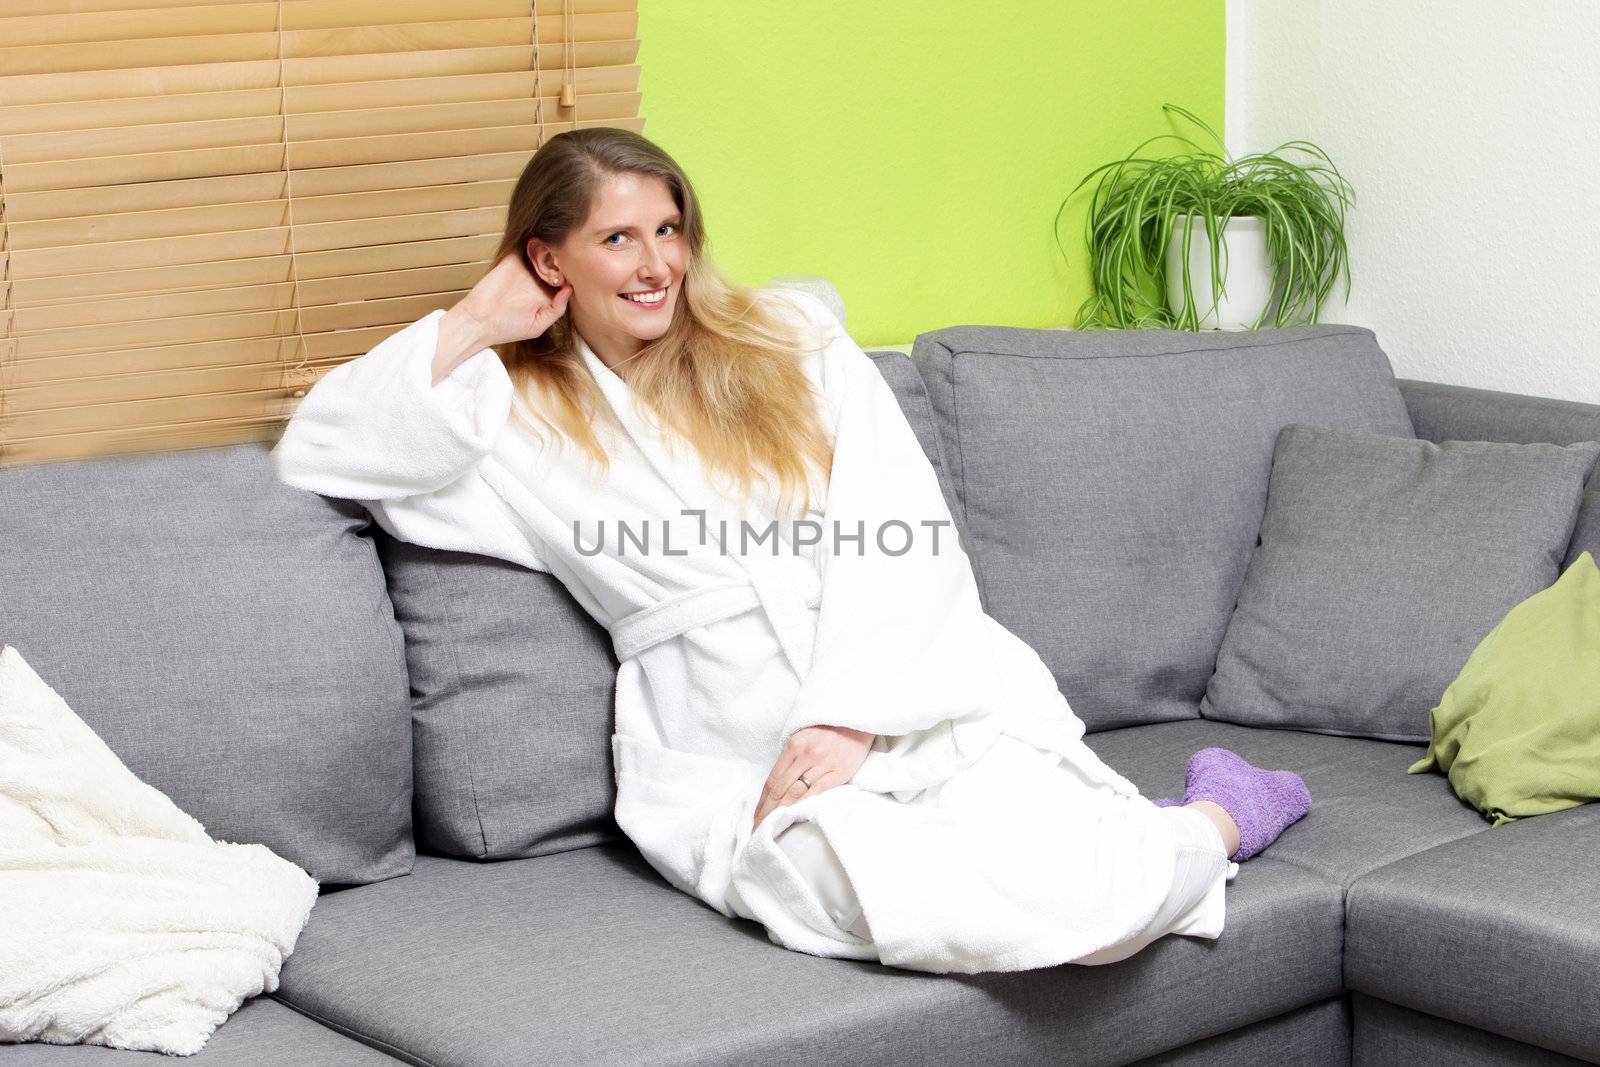 Smiling woman sitting on a couch looking at the camera